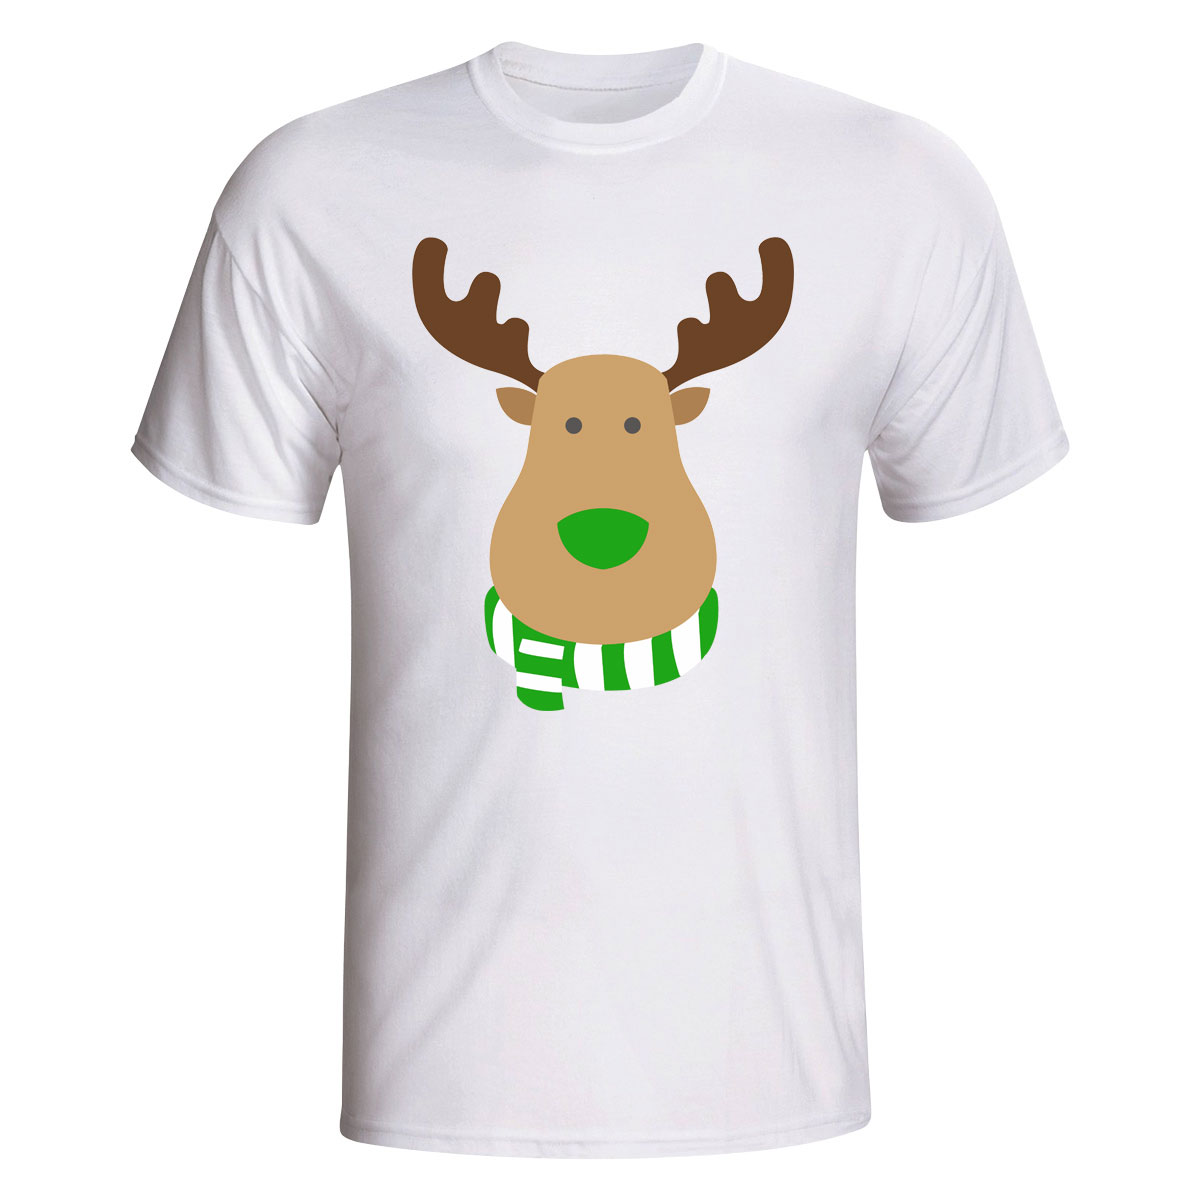 Sporting Lisbon Rudolph Supporters T-shirt (white)